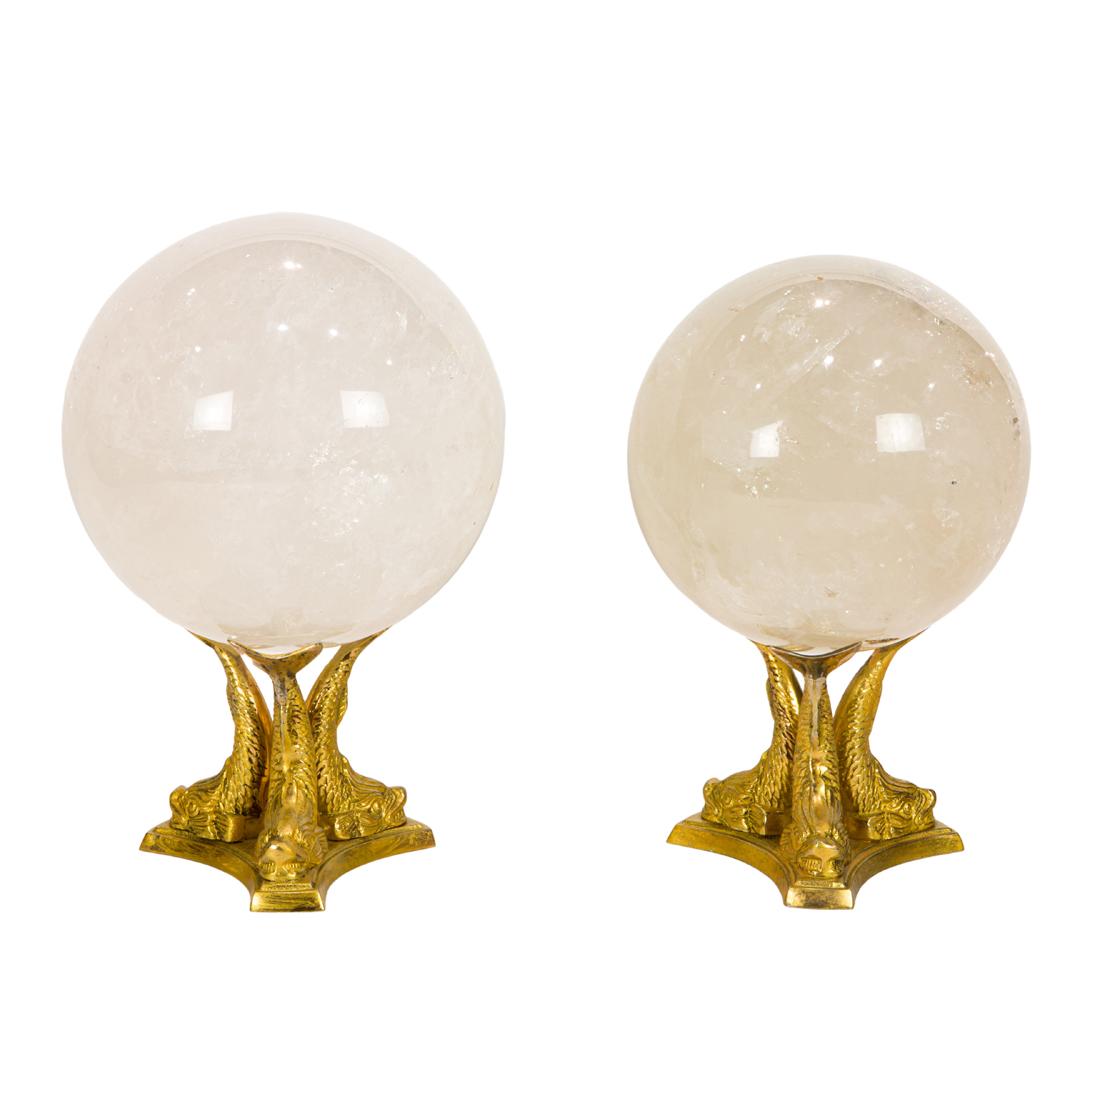 A PAIR OF NEOCLASSICAL STYLE ROCK